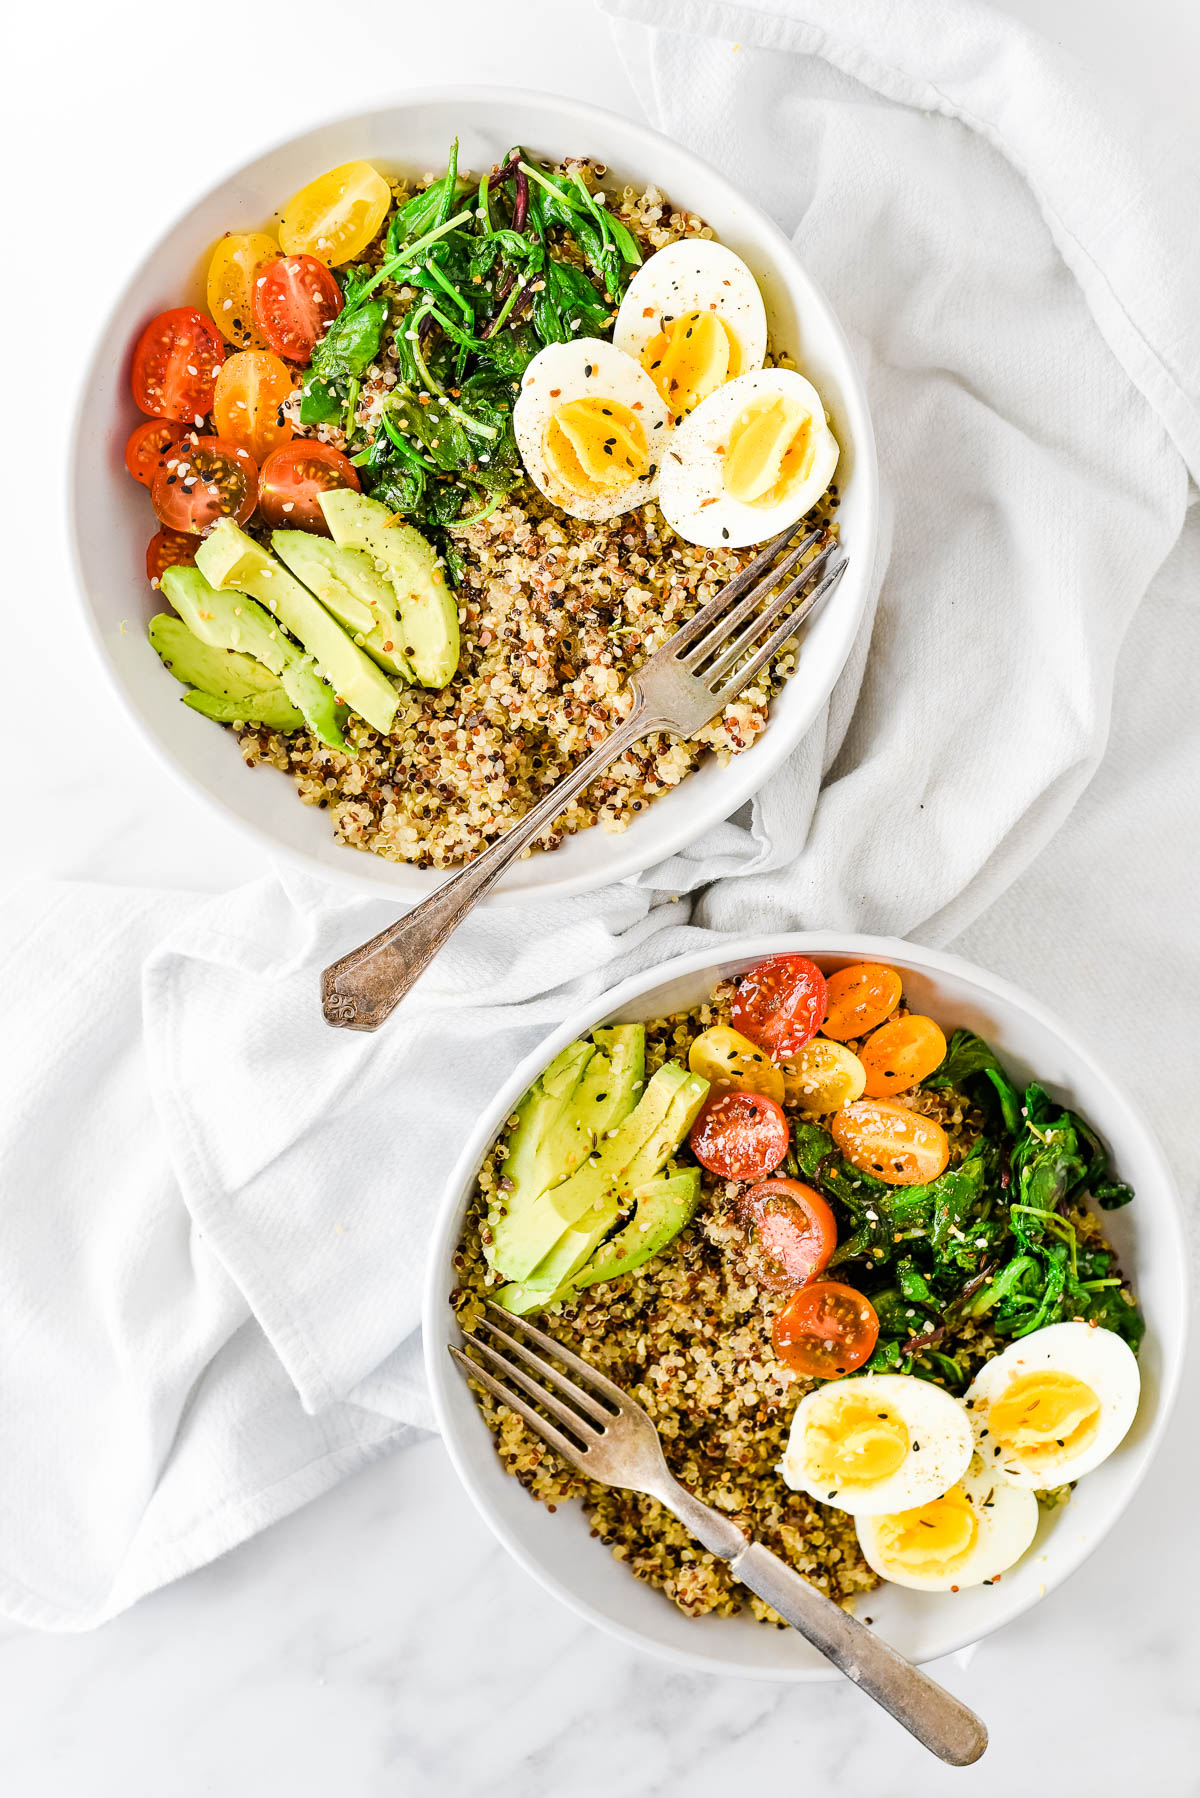 How to Make Eggs and Quinoa Breakfast Bowl - The Gingered Whisk